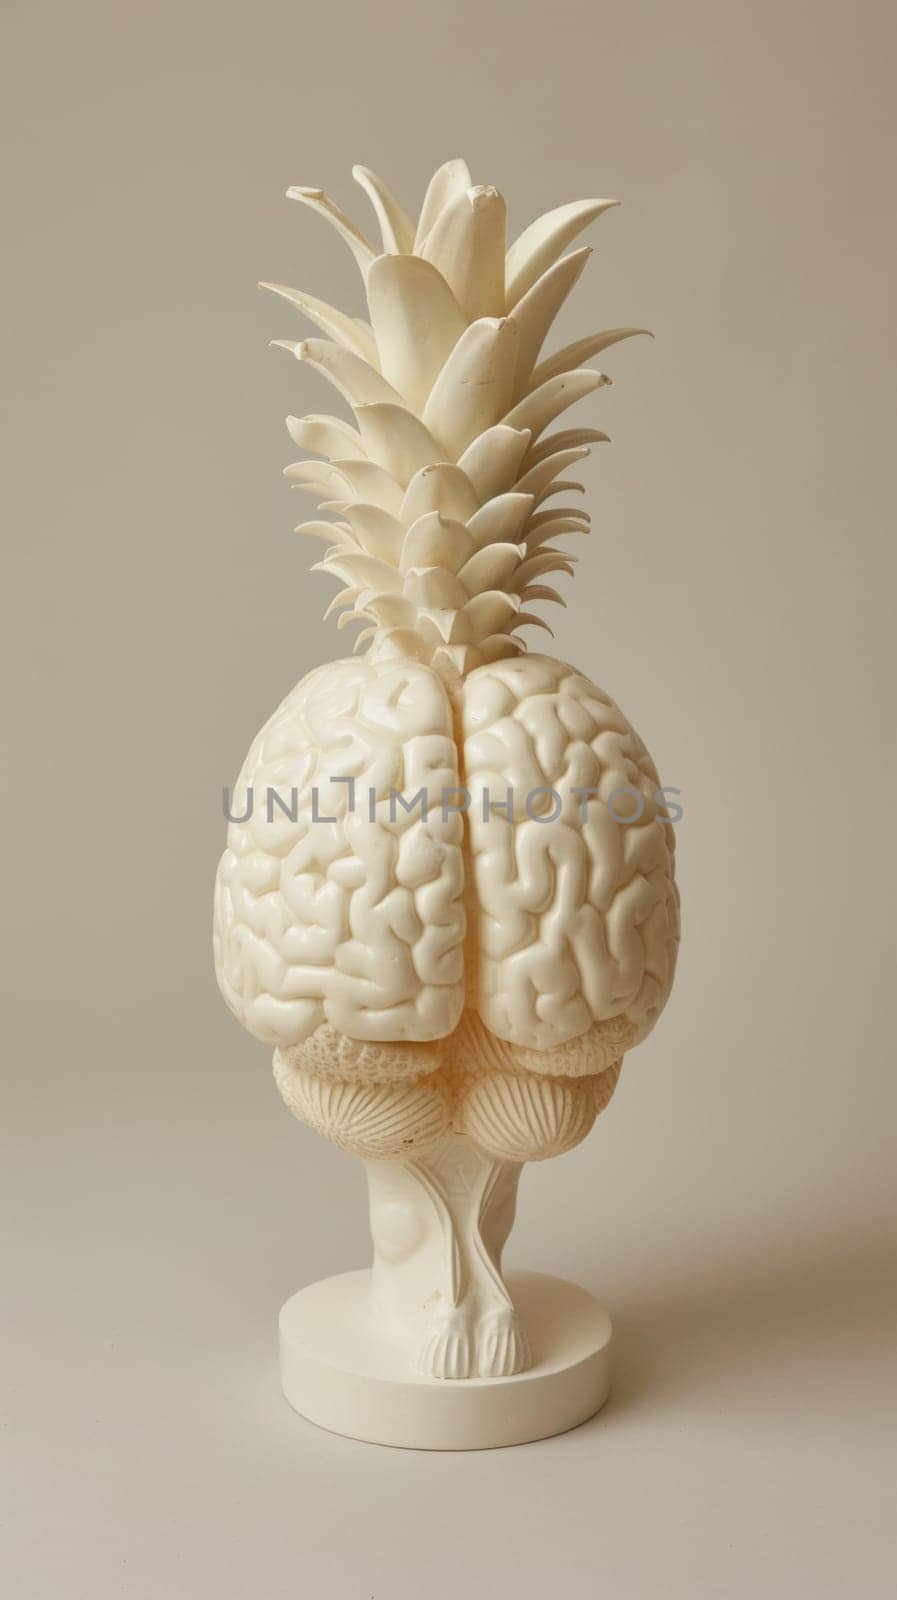 A pineapple shaped like a brain on top of a stand